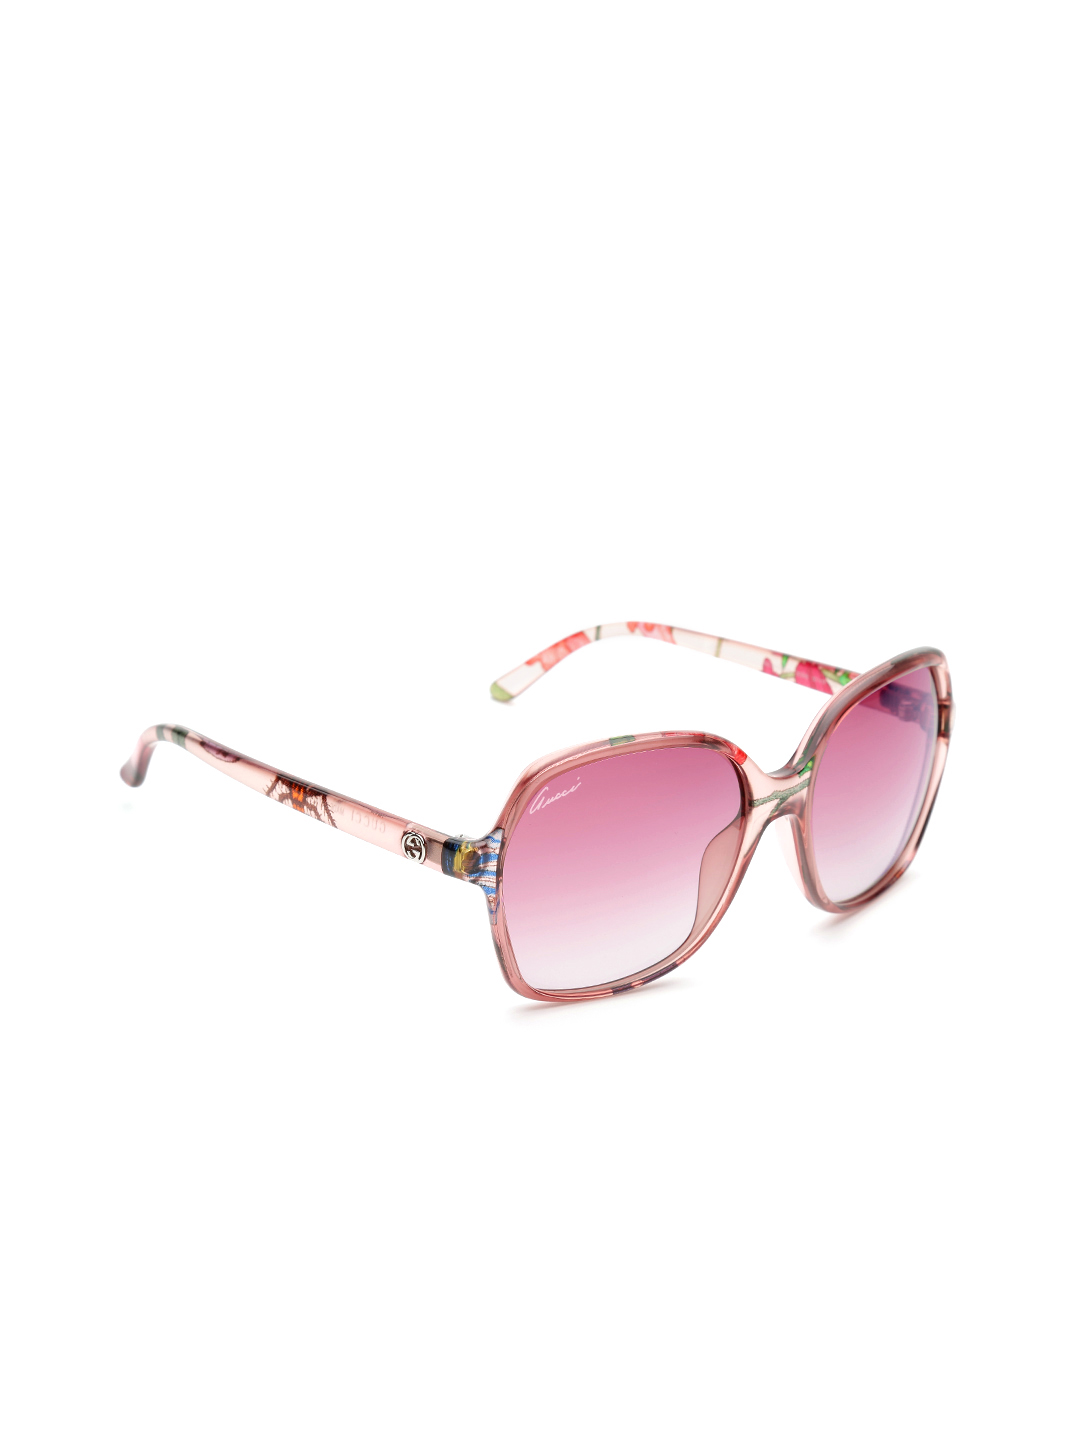 Gucci Women Printed Butterfly Sunglasses GG 3632/N/S 2E616